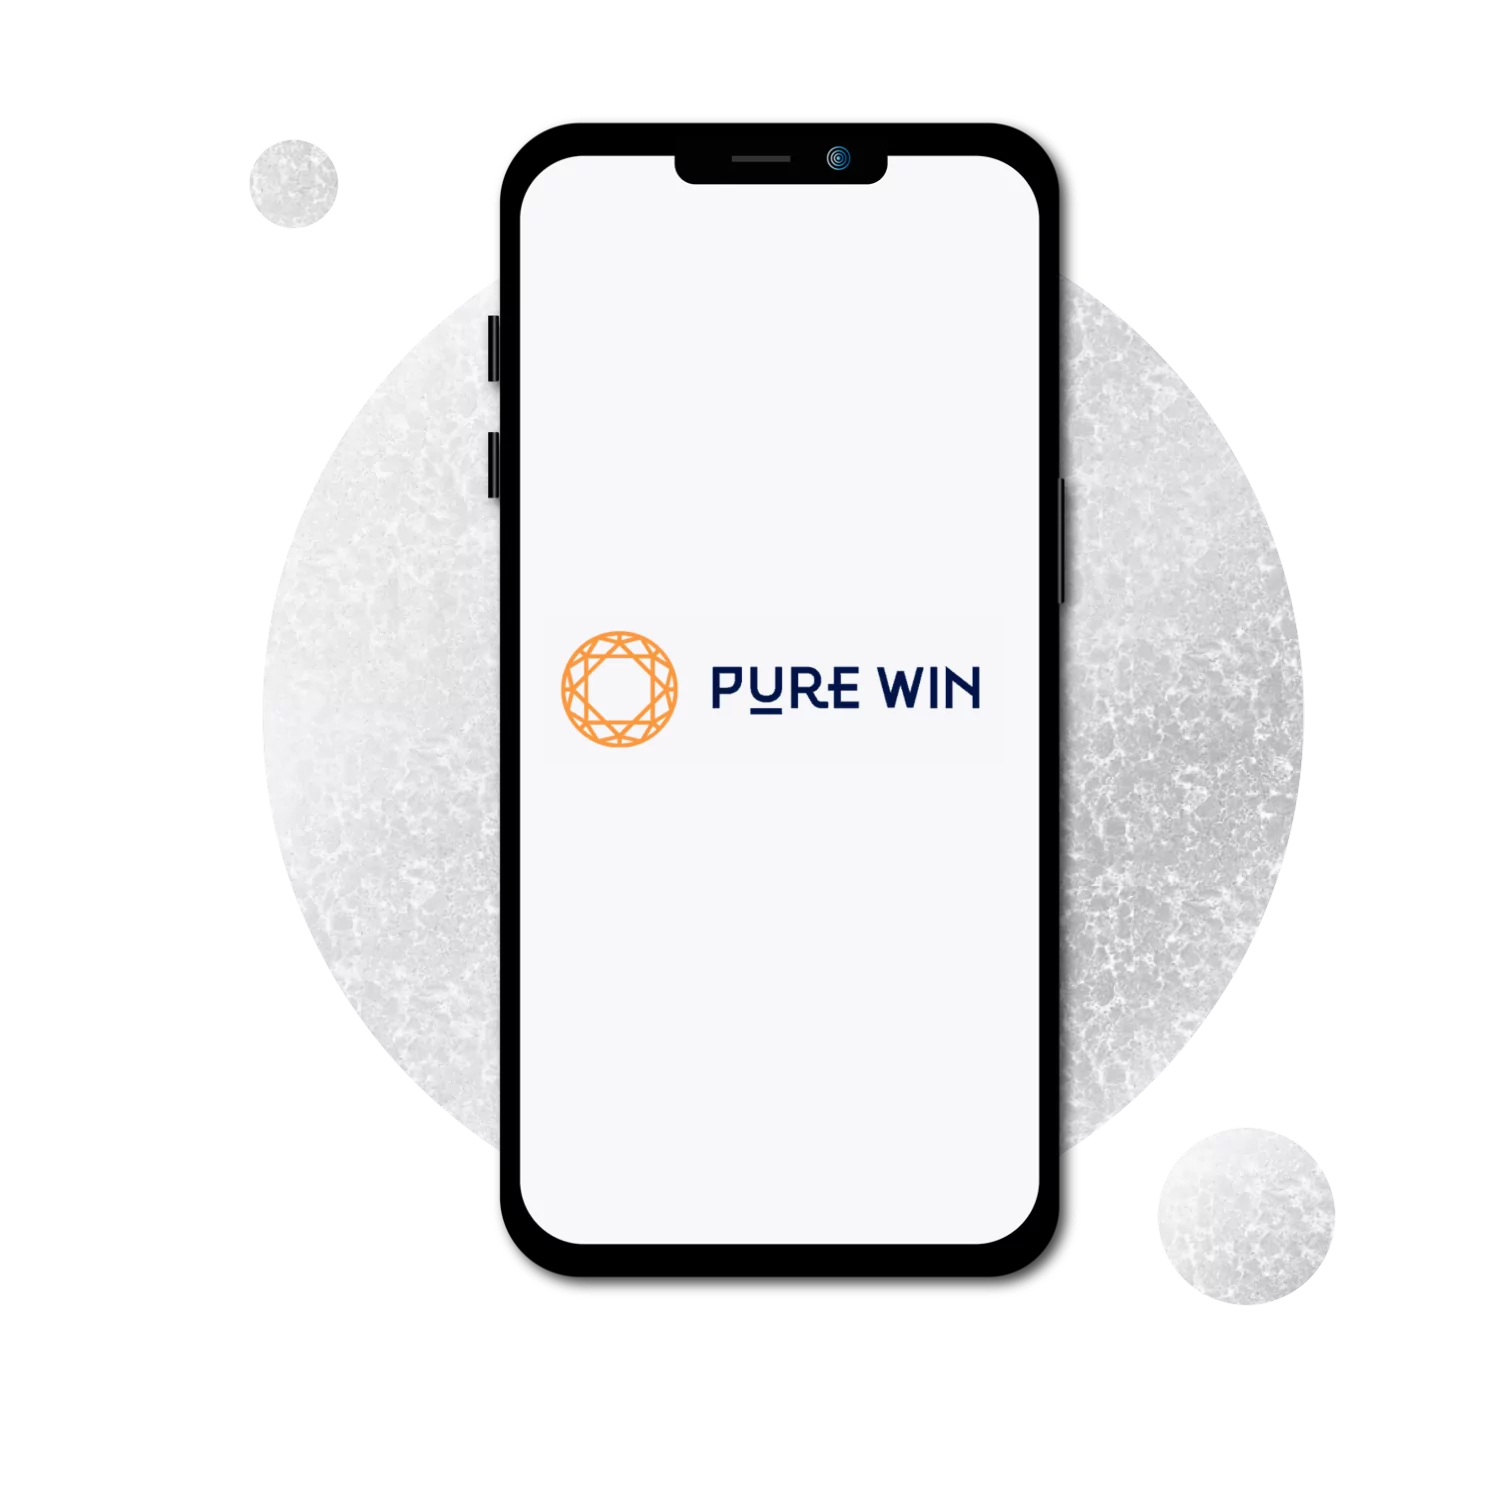 Sign up for Pure Win and place winning bets on cricket.